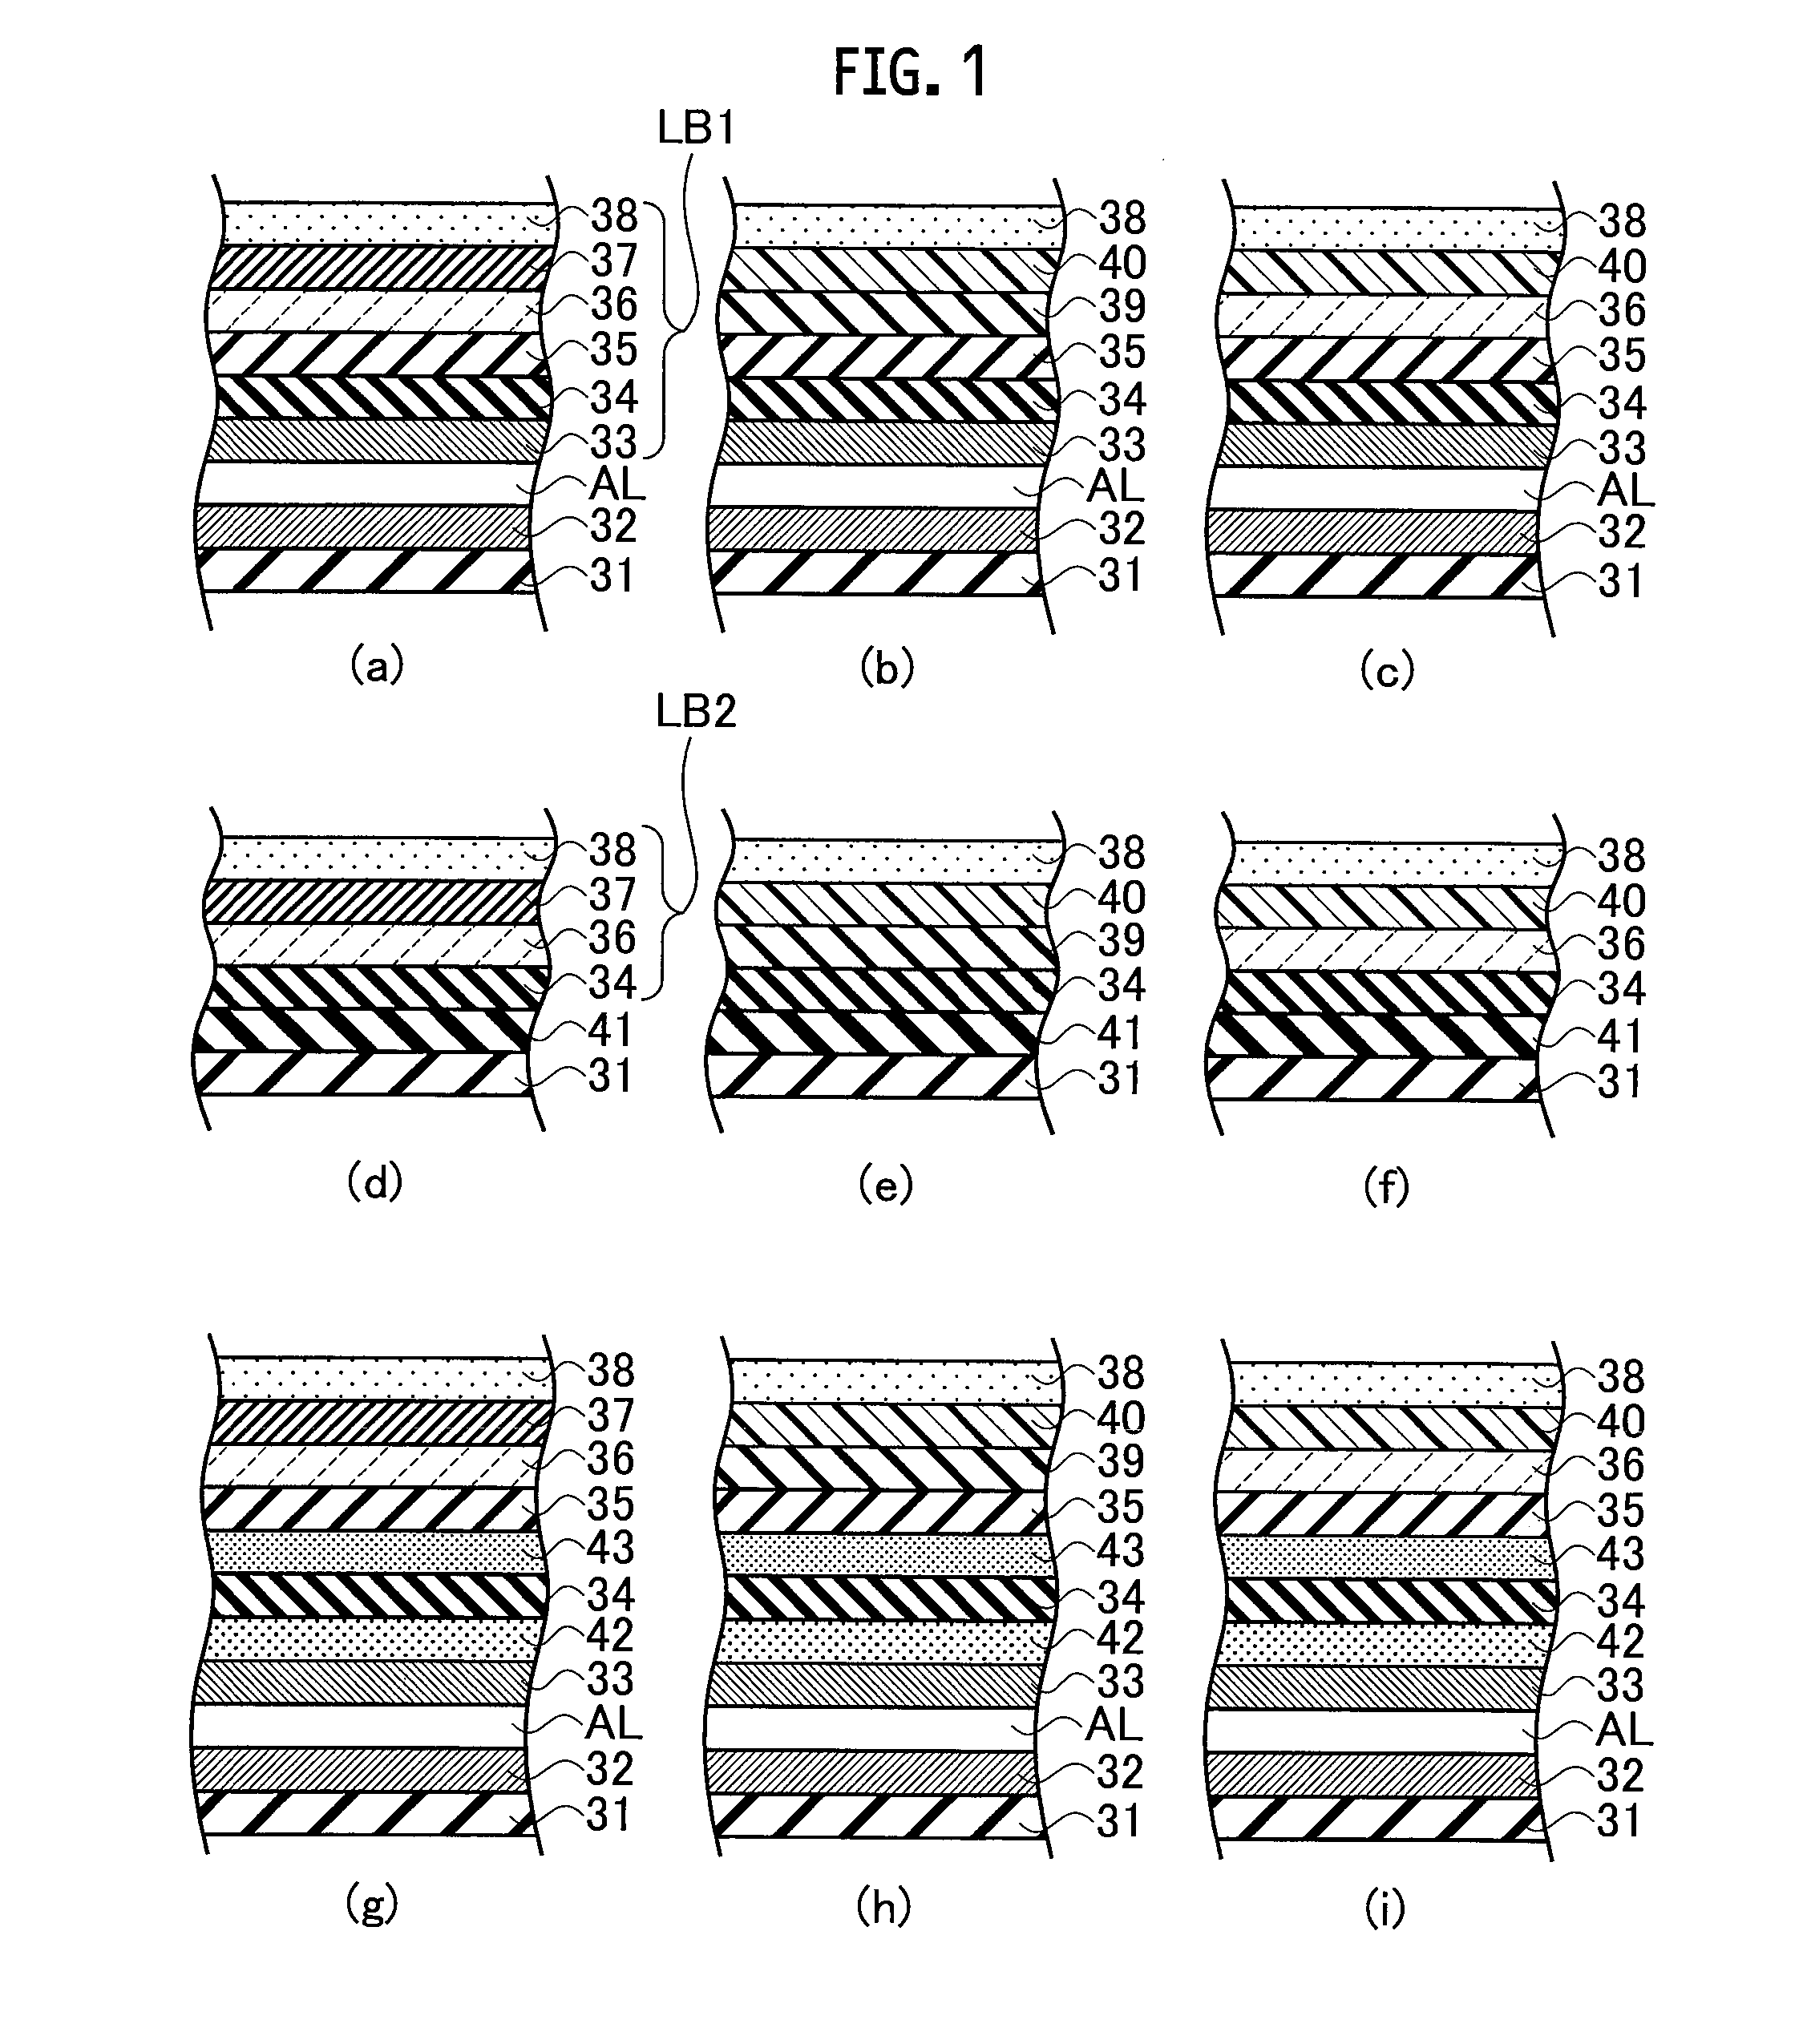 Display apparatus, automotive display apparatus, and method for manufacturing the display apparatus